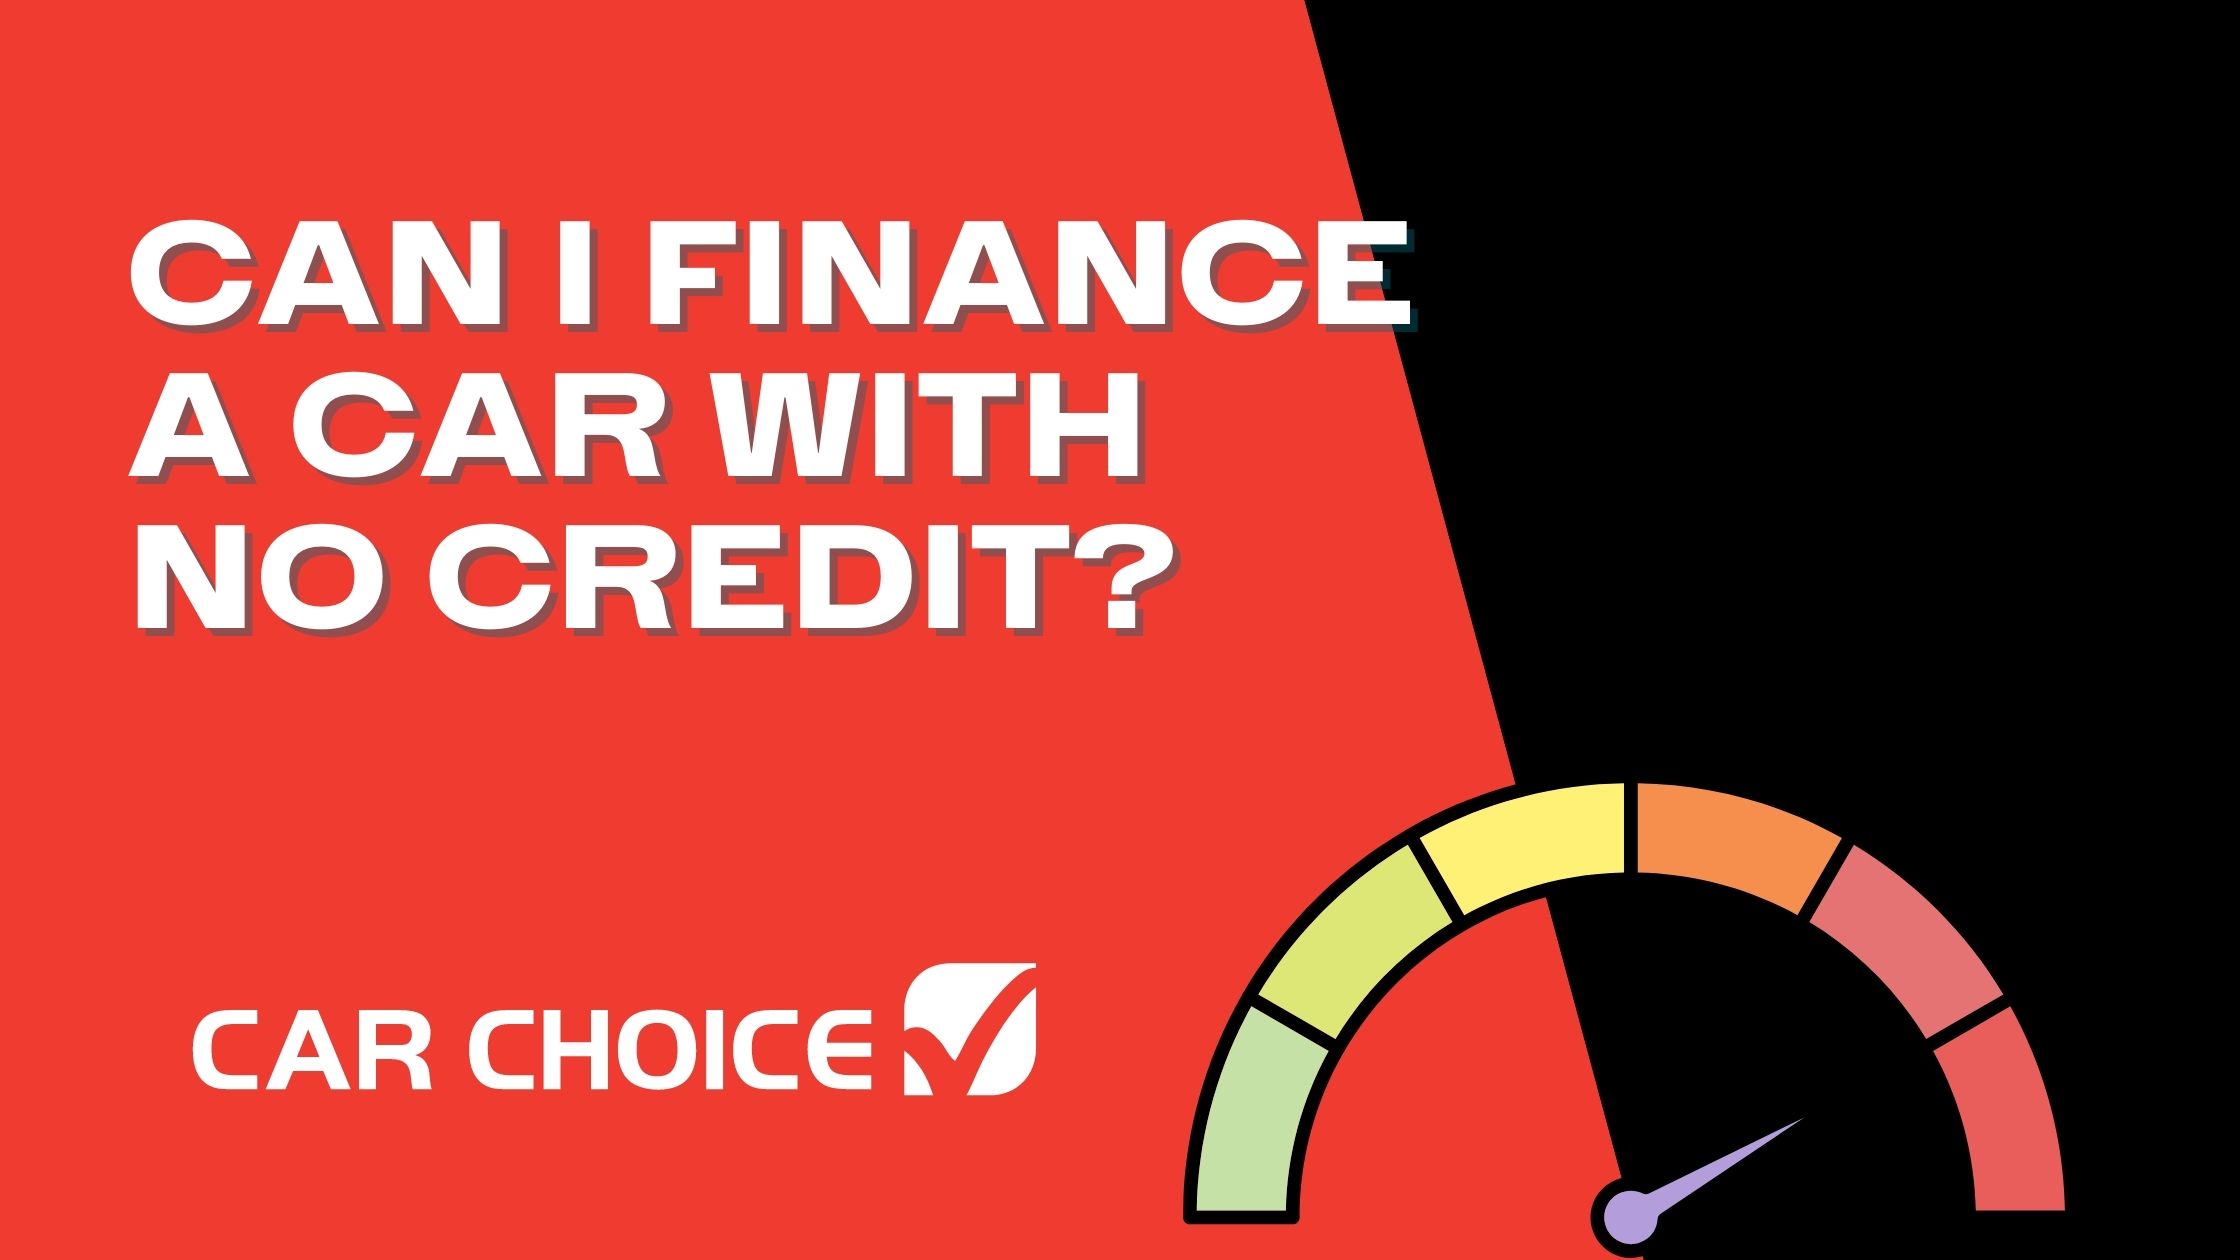 Can I Finance a Car with No Credit? A Guide for the Credit-Challenged on Auto Loan Approval